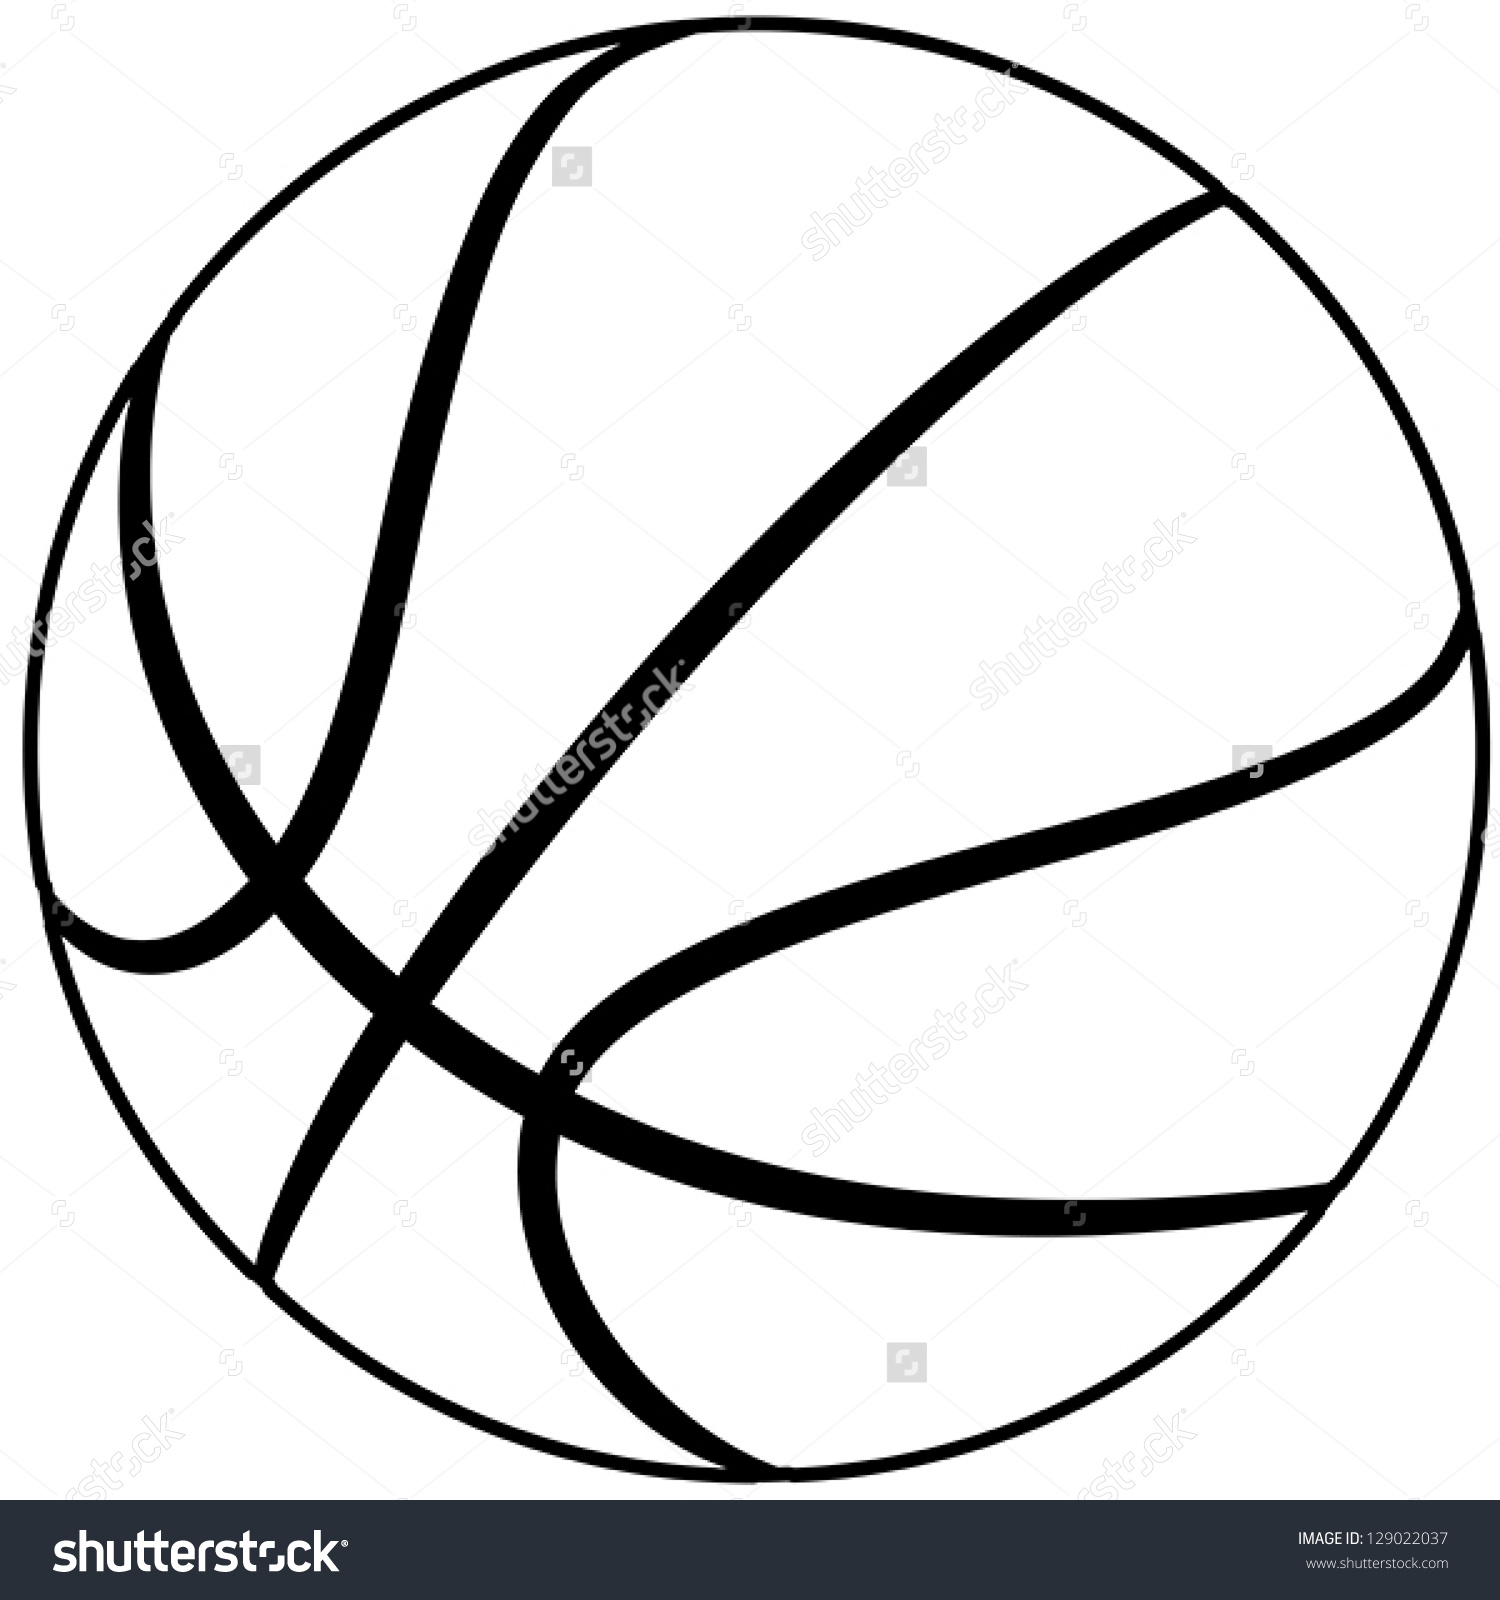 basketball-clipart-black-and-